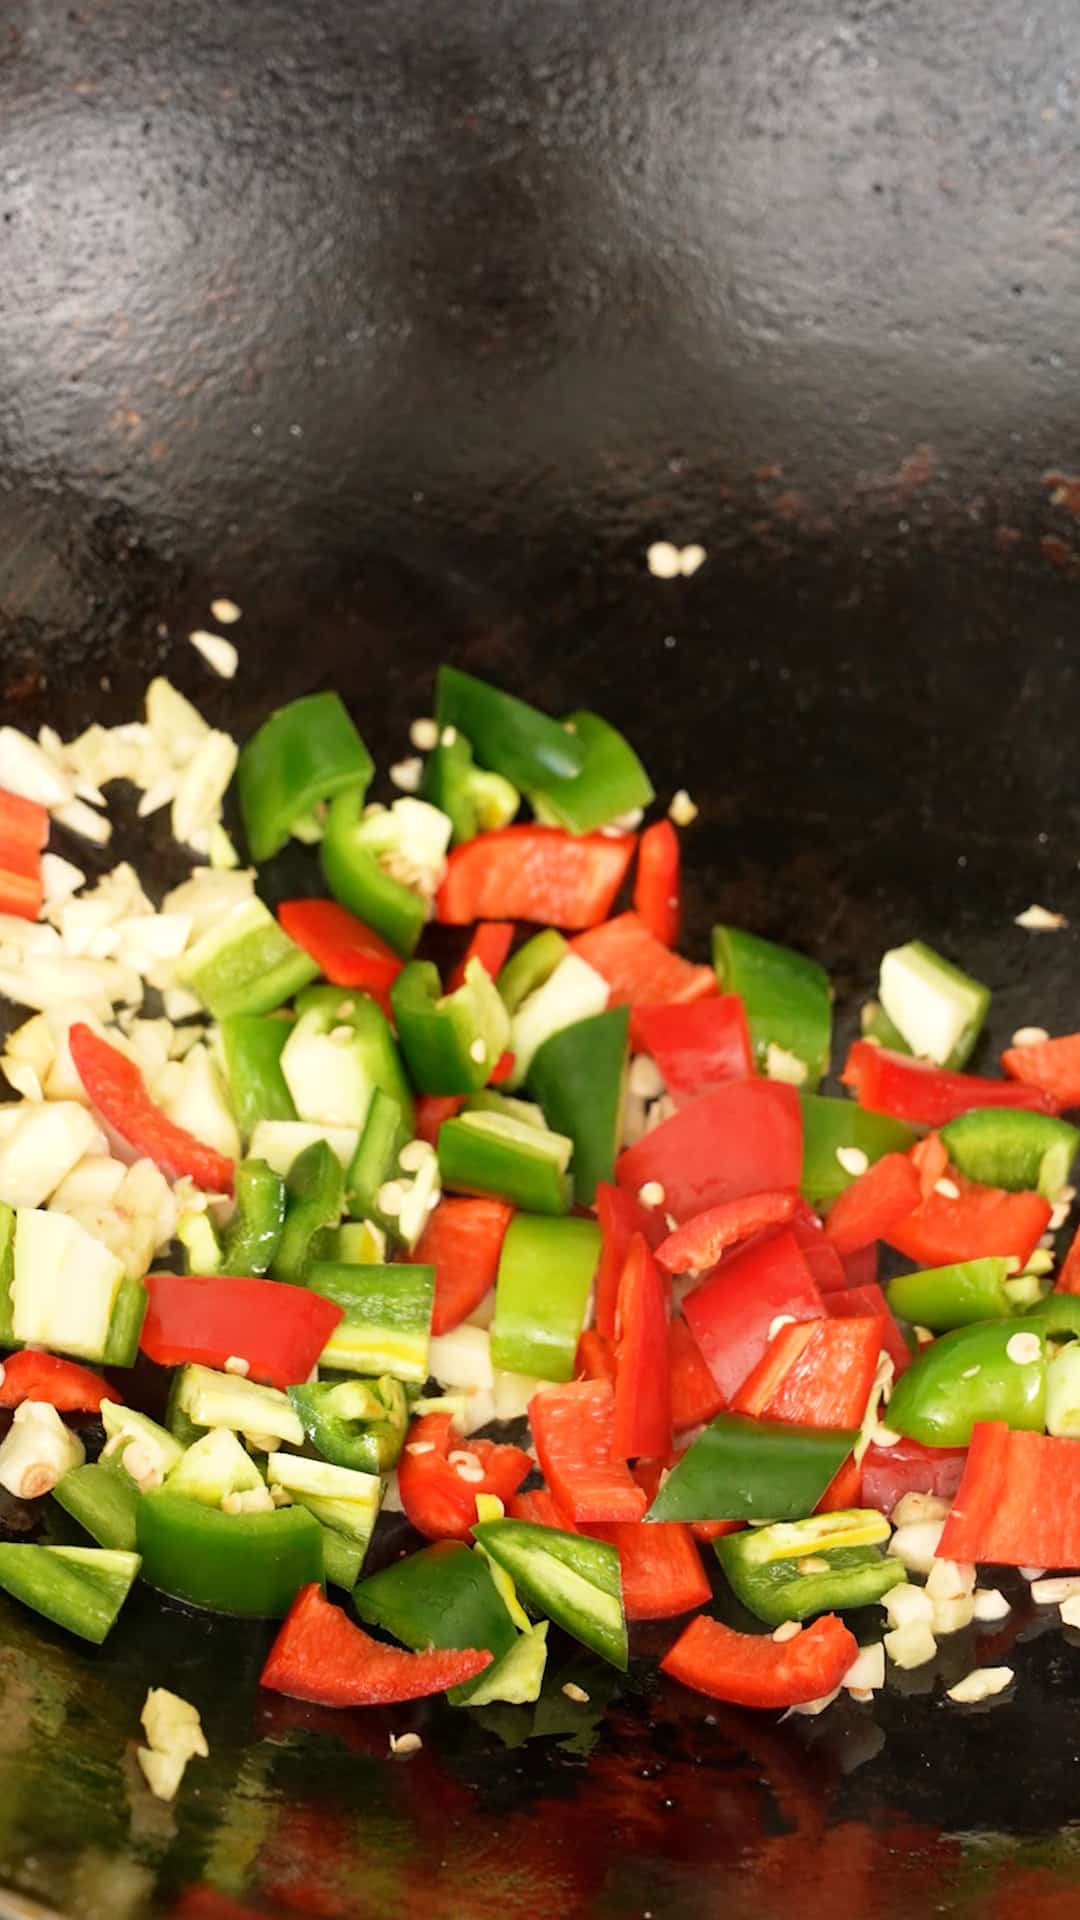 Peppers and garlic being stir fried in a wok.